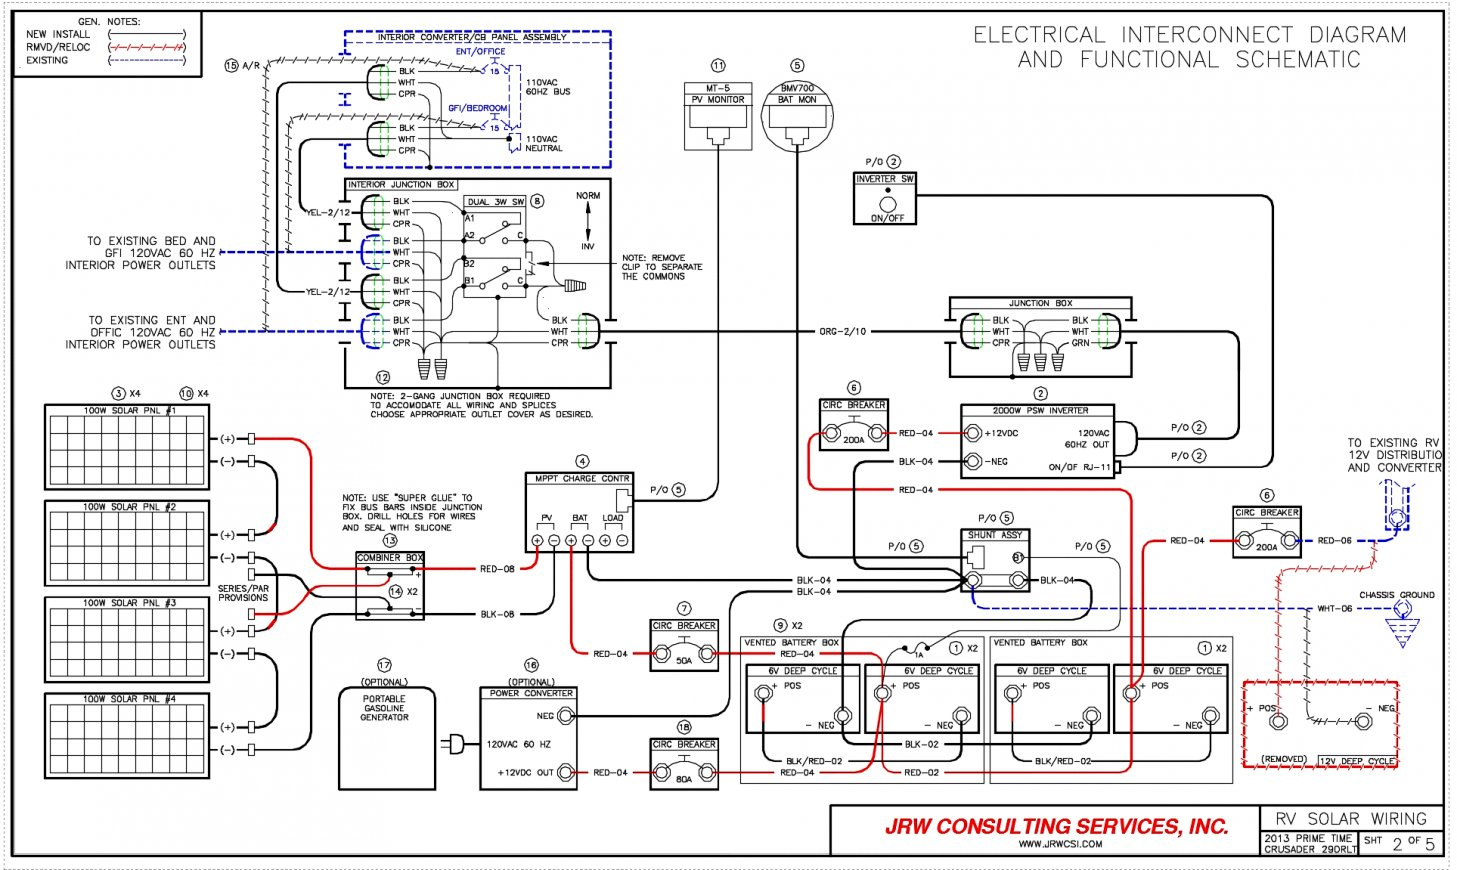 Forest River Rv Wiring Diagrams | Wiring Diagram - Forest River Wiring Diagram